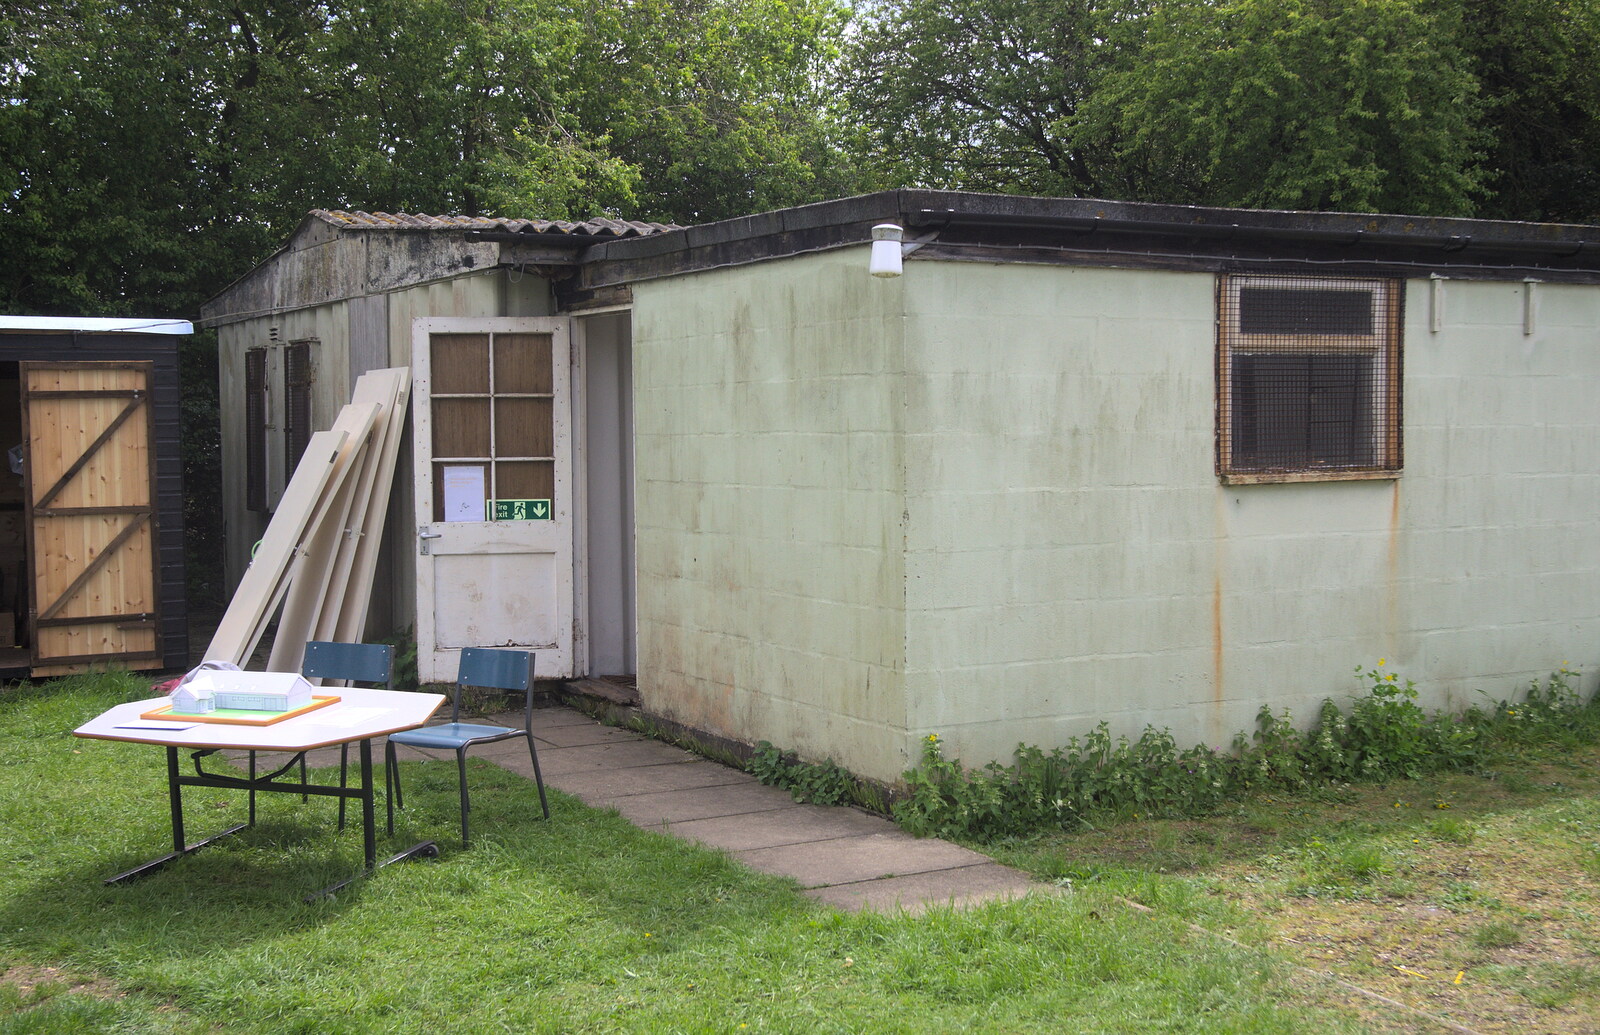 The front of the hut from Demolishing The 1st Eye Scout Hut, Wellington Road, Eye, Suffolk - 11th May 2013